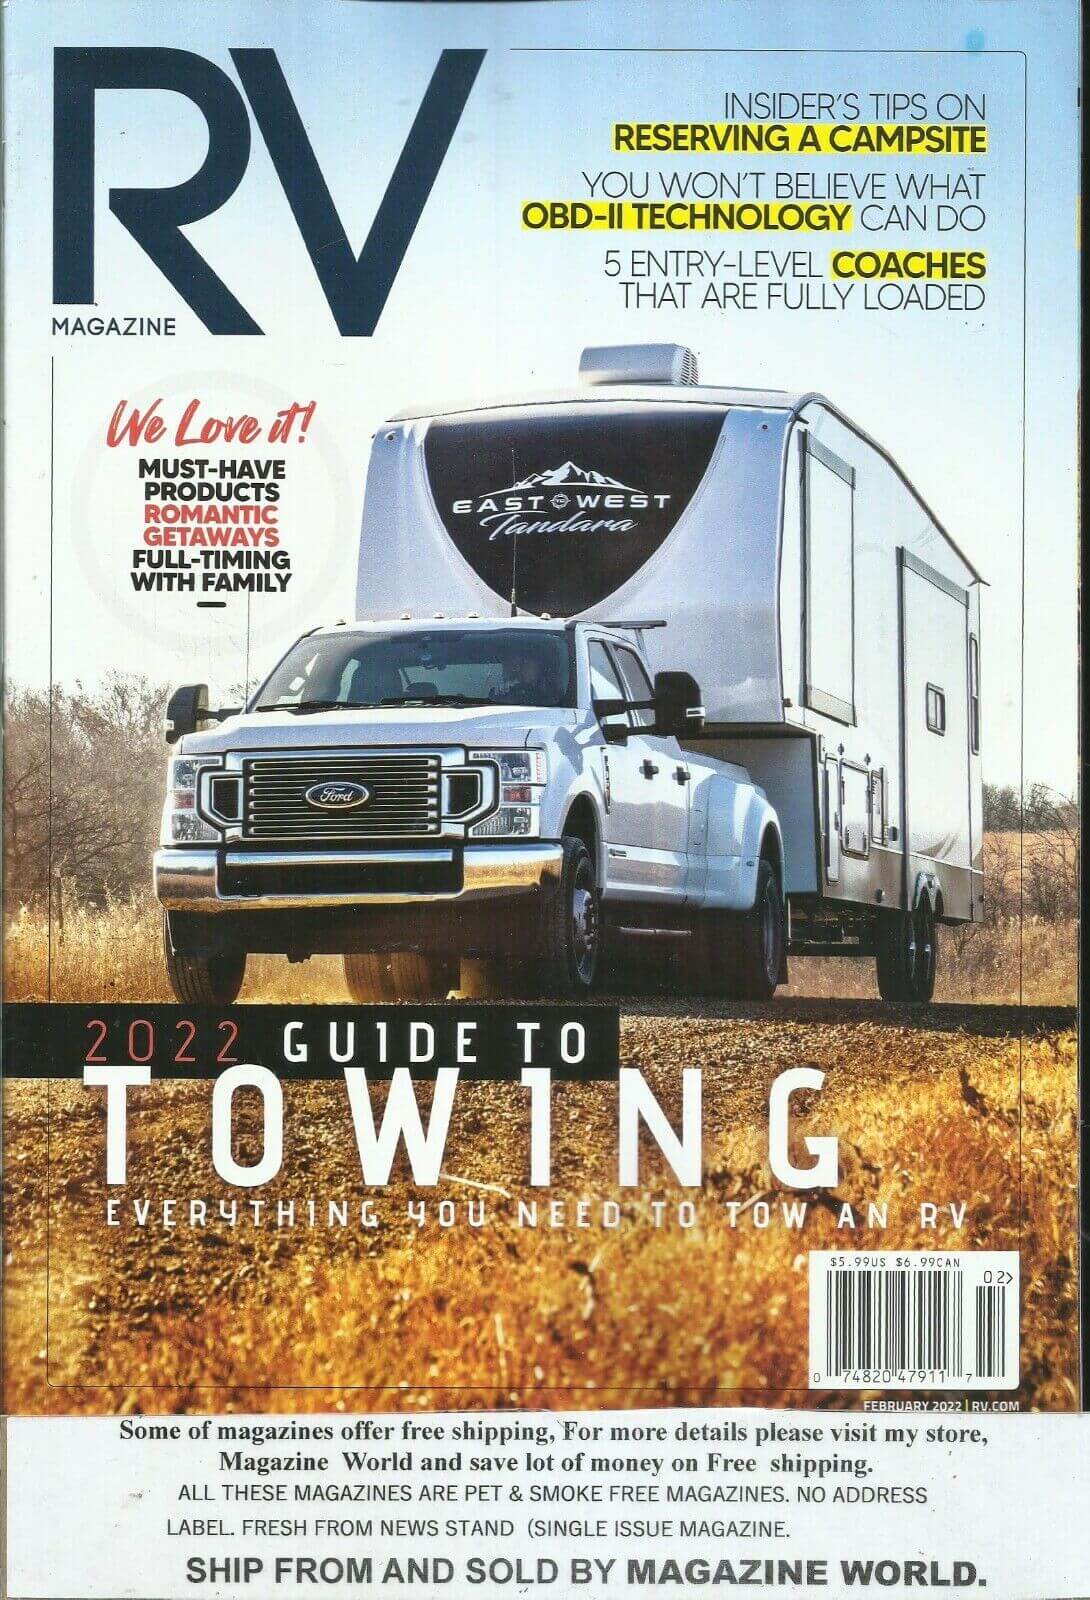 RV magazine cover featuring towing guide and tips.